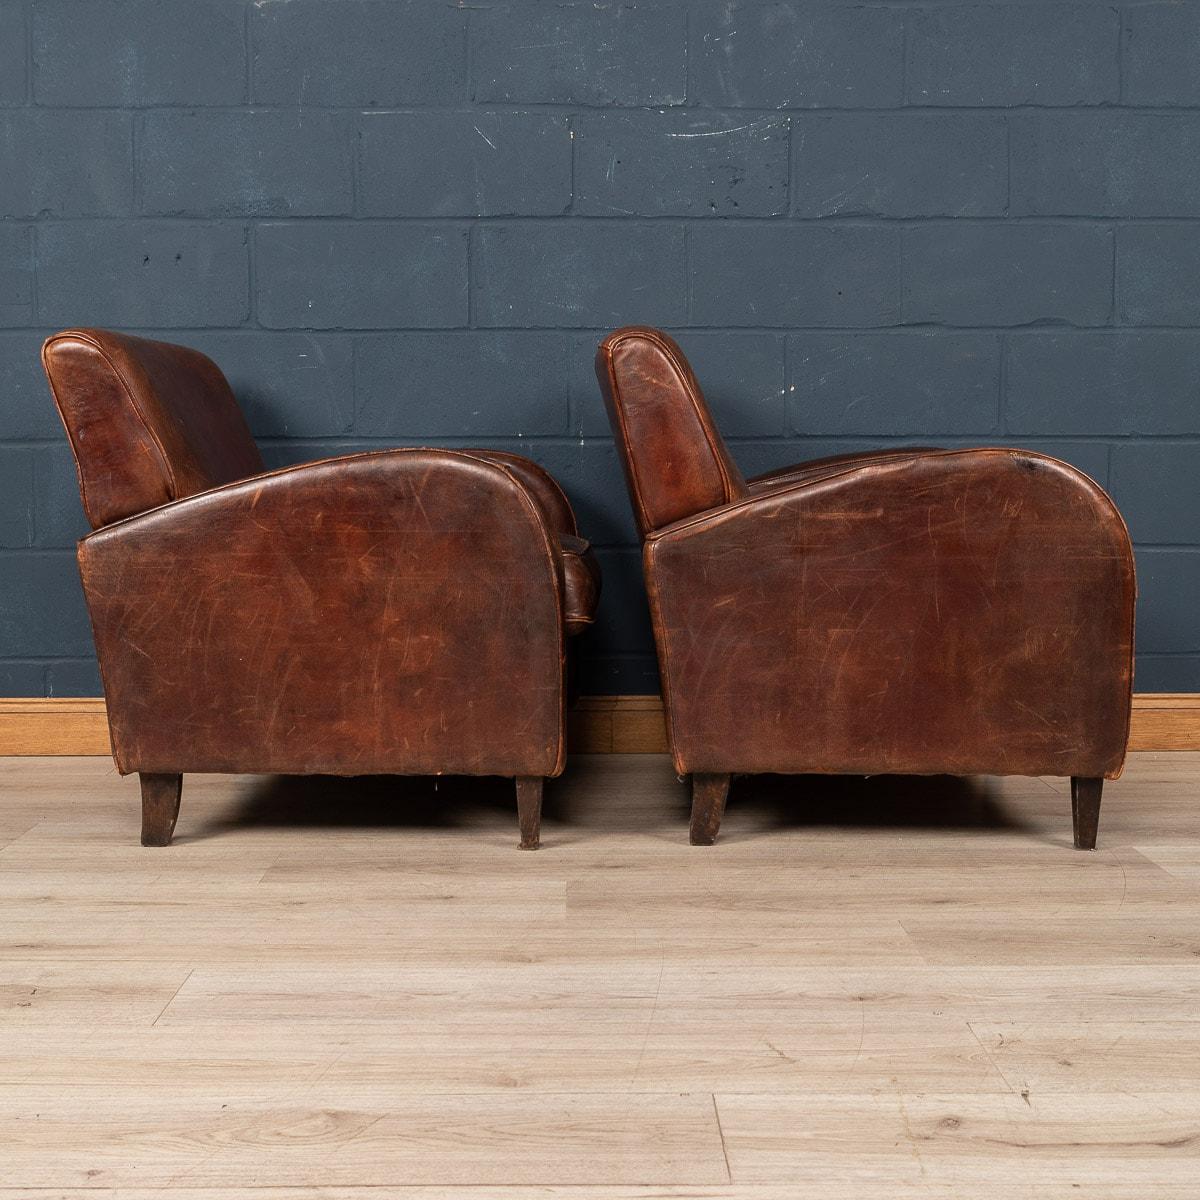 20th Century Pair of Dutch Leather Club Chairs In Good Condition For Sale In Royal Tunbridge Wells, Kent